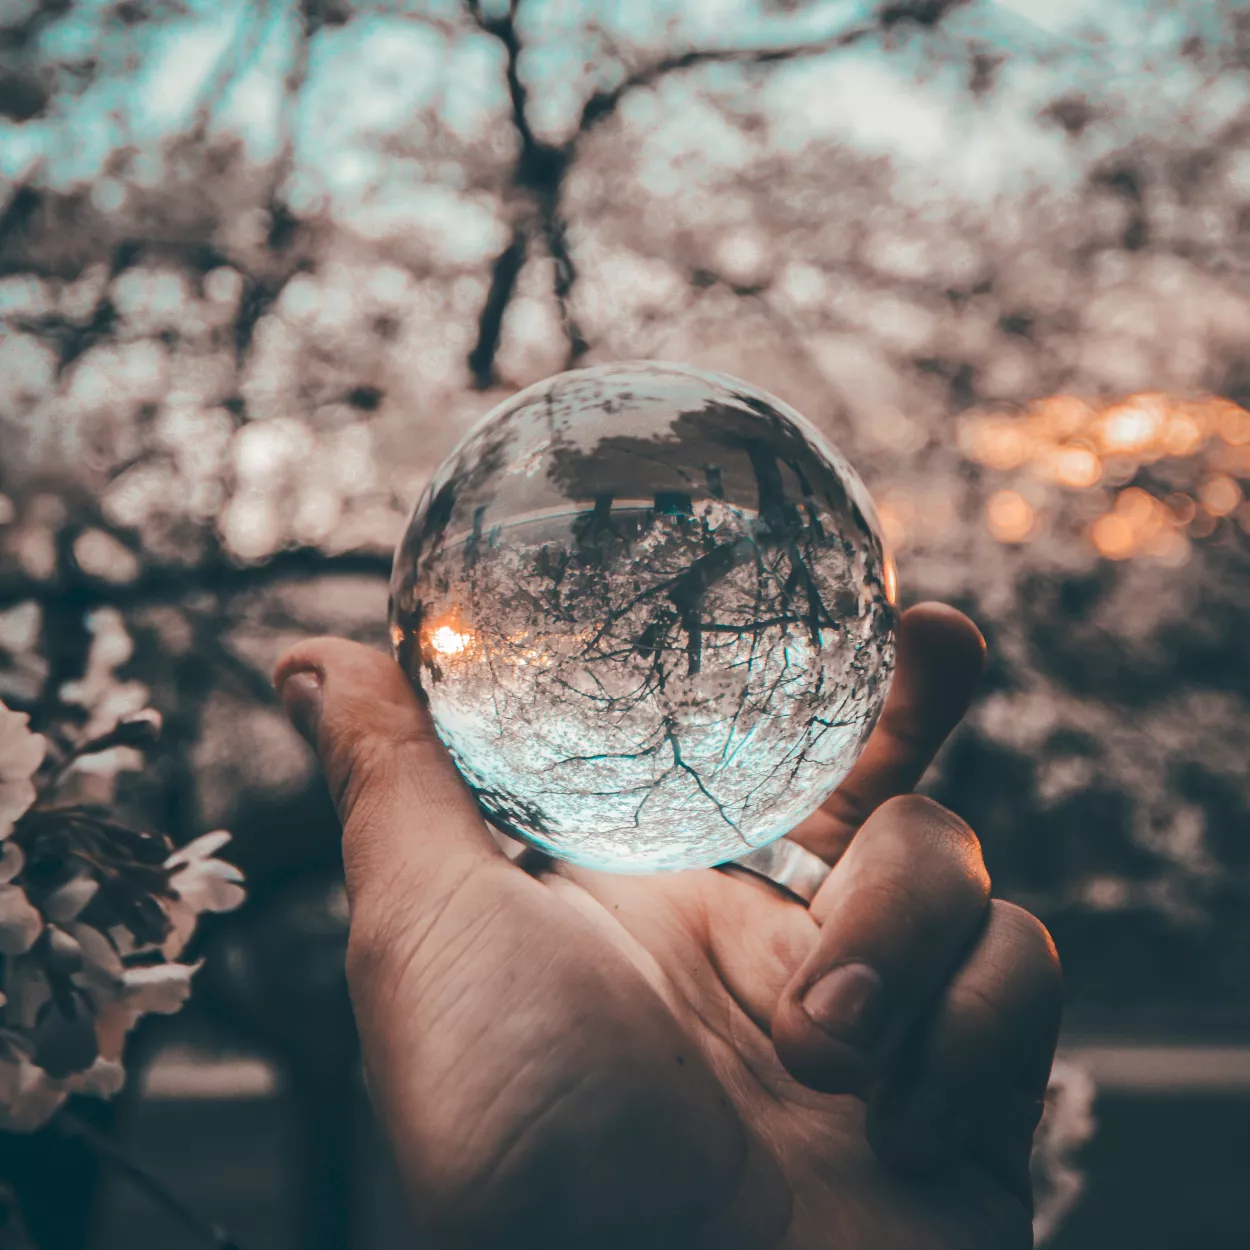 Glass sphere held up before a cherry blossom tree